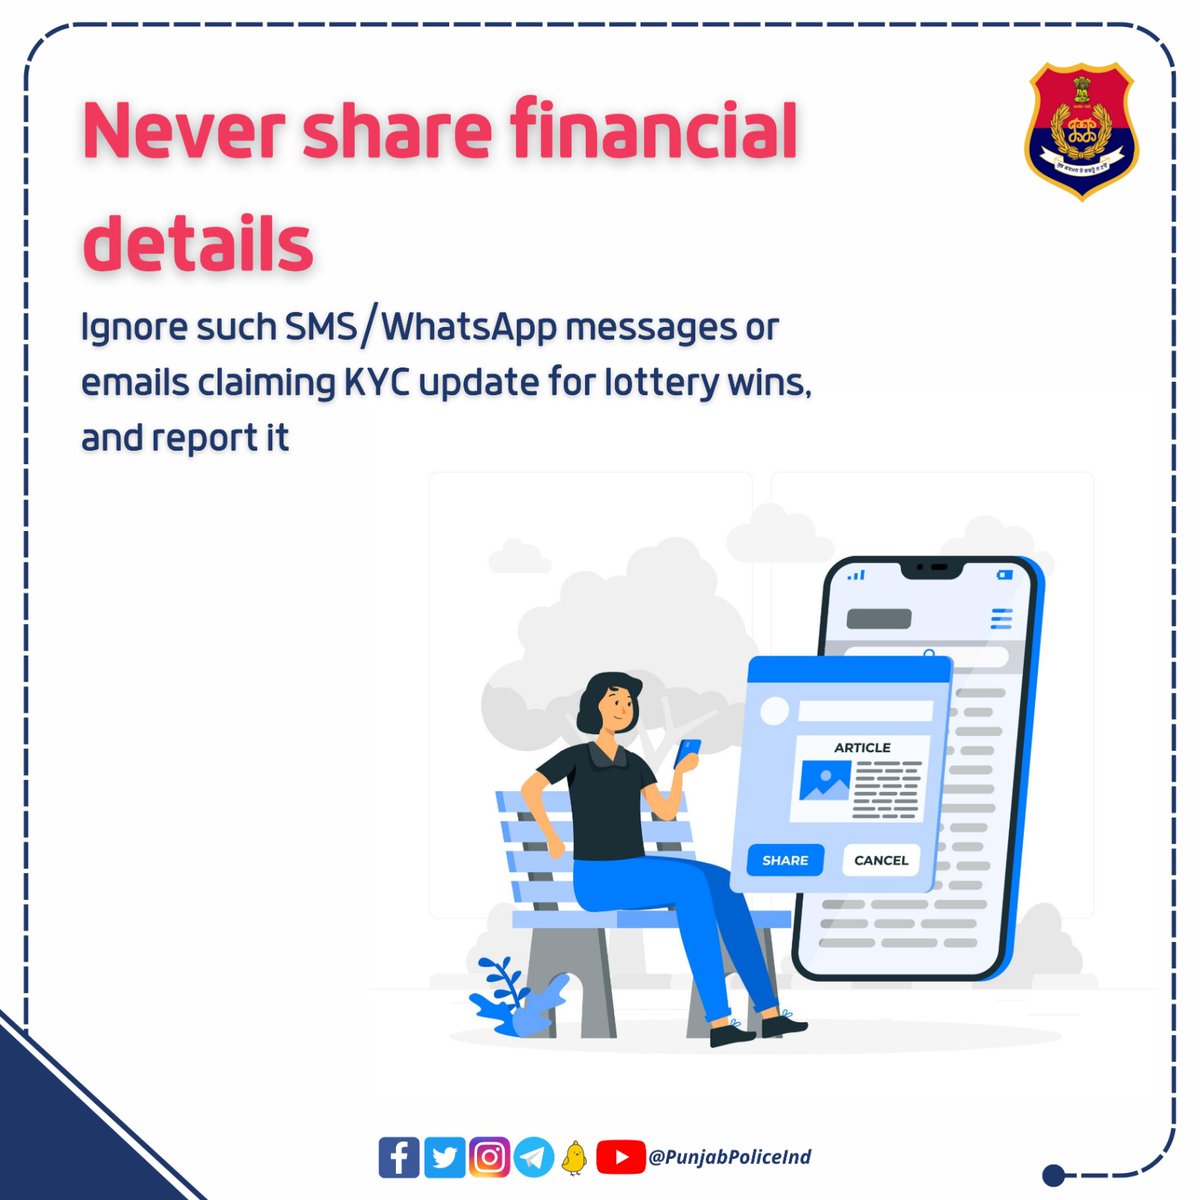 Protect yourself from scams! Never share your financial details or respond to SMS/WhatsApp messages or emails requesting KYC updates for lottery wins. Stay safe online and report suspicious activity immediately. #CyberSecurityAwareness